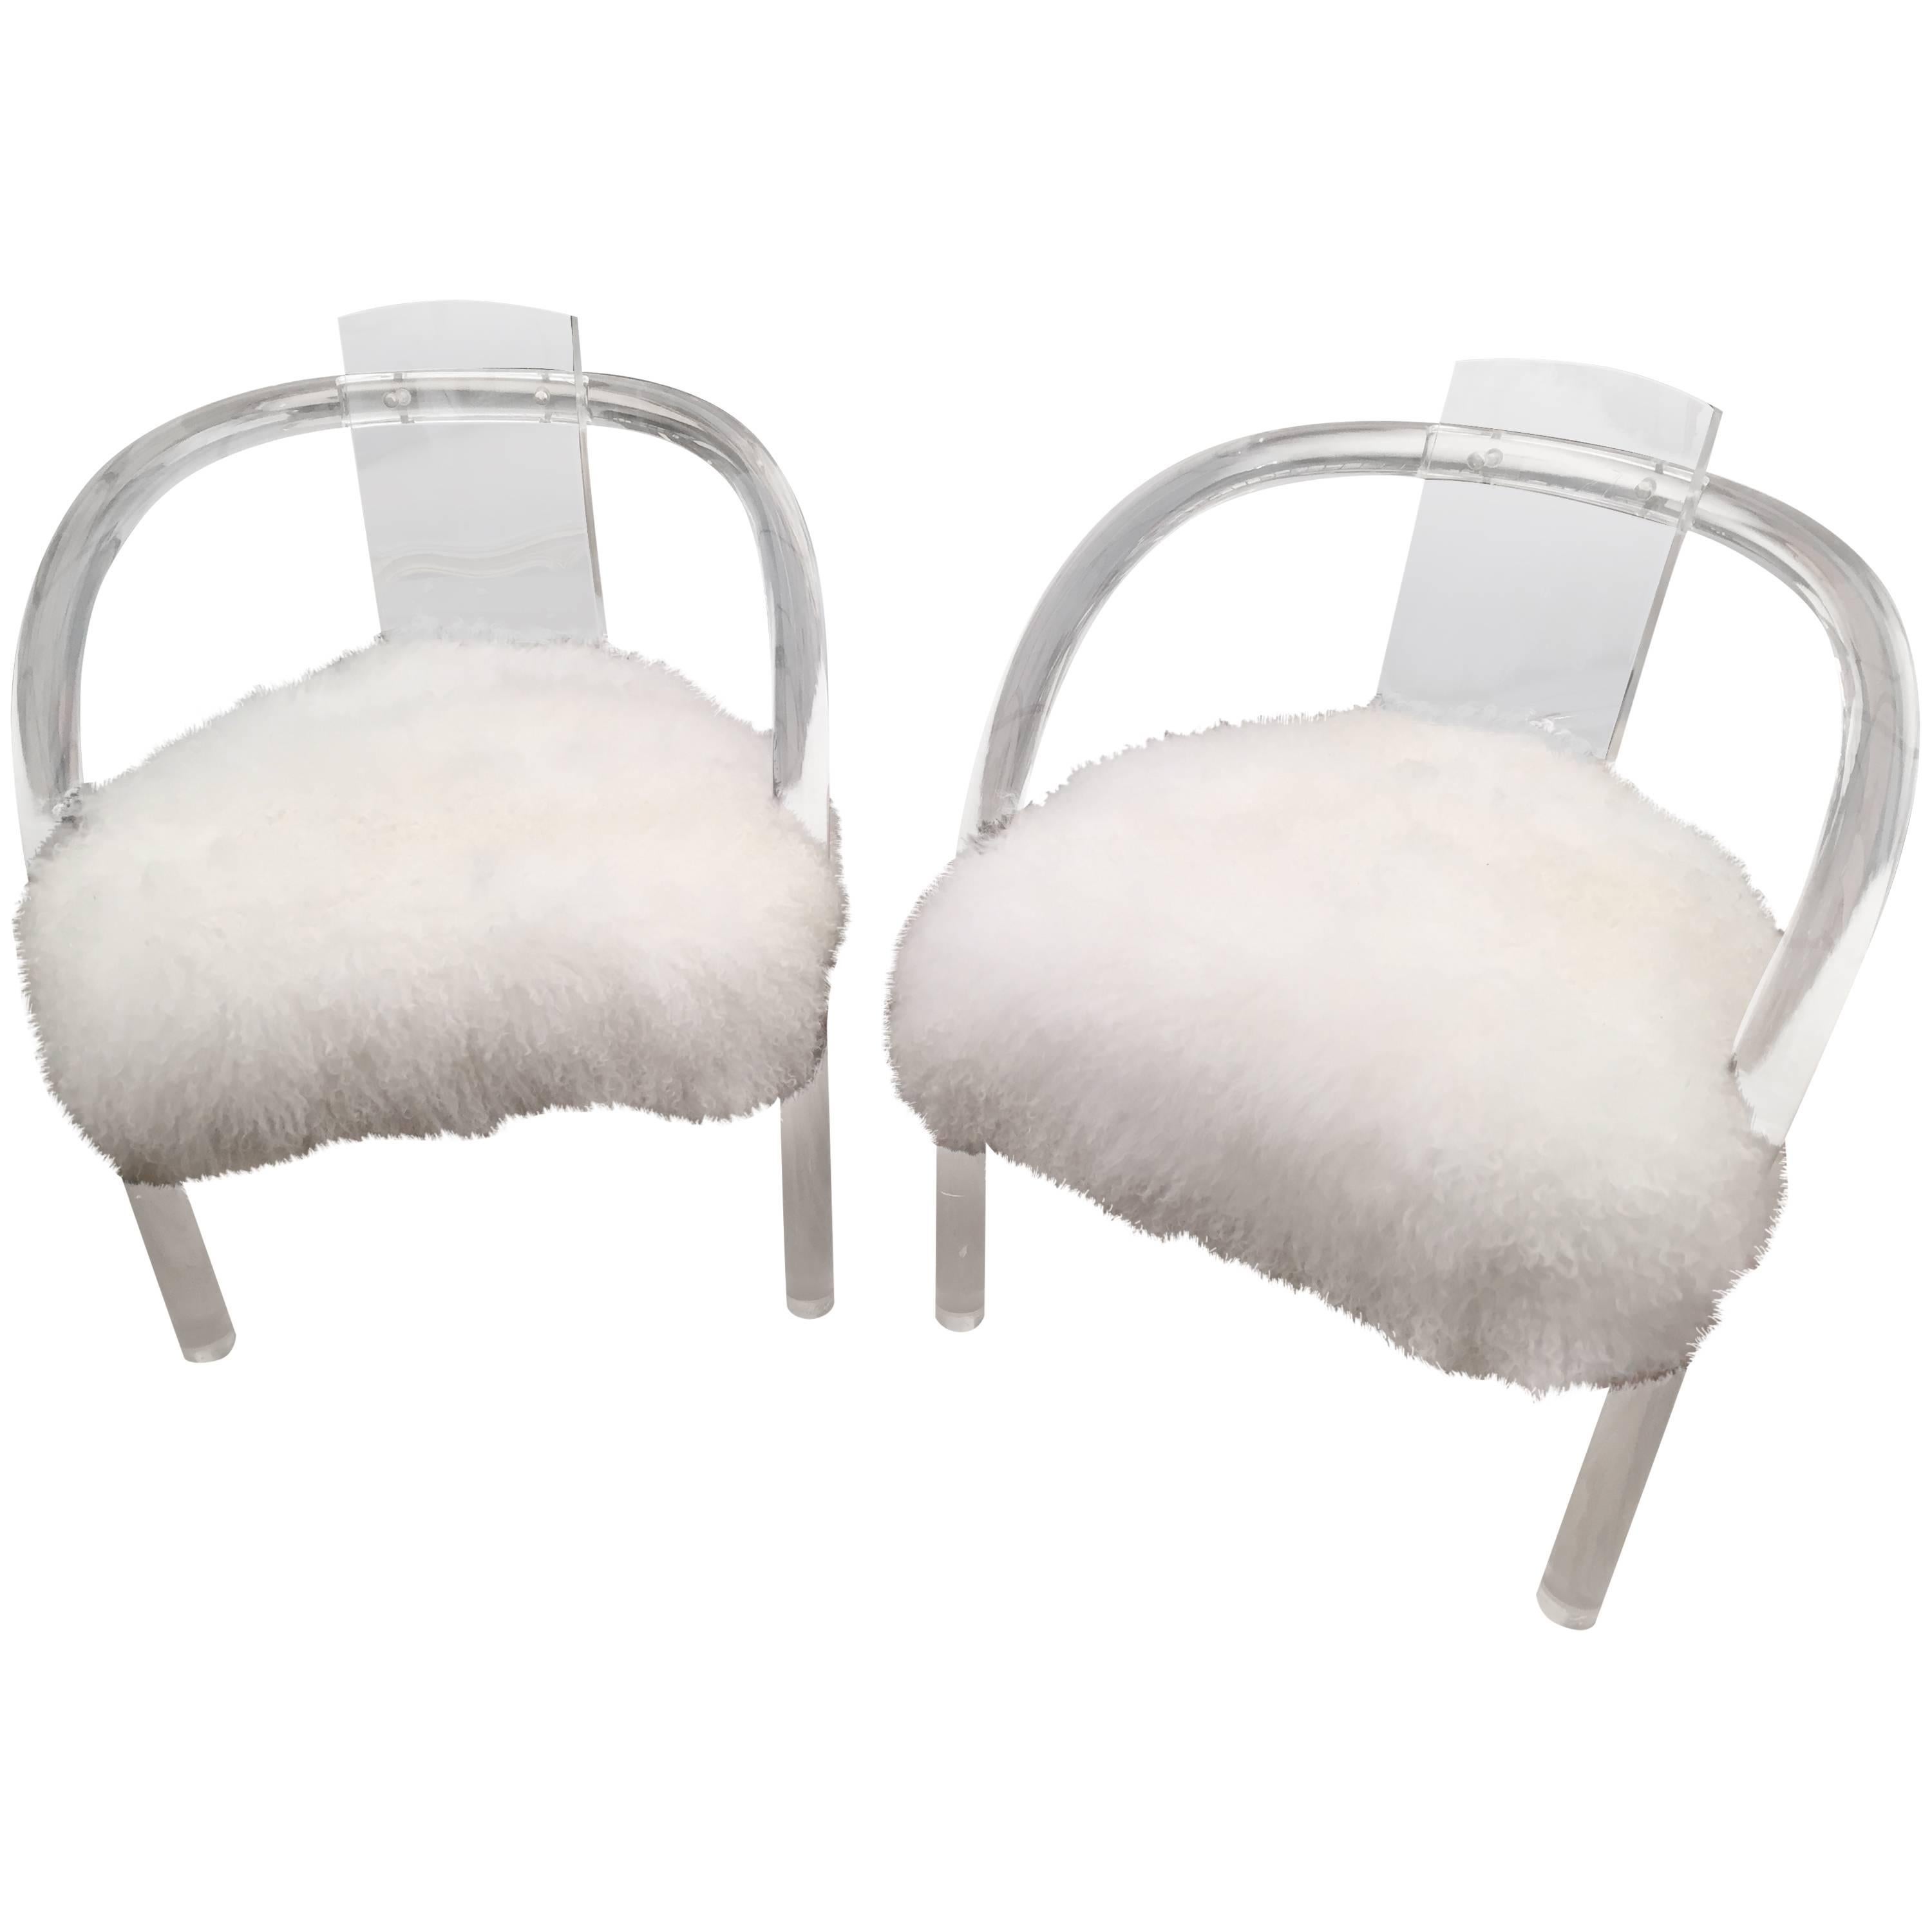 Pair of Wycombe-Meyer Lucite "Loop" Chairs with Tibetan Fur Seats For Sale